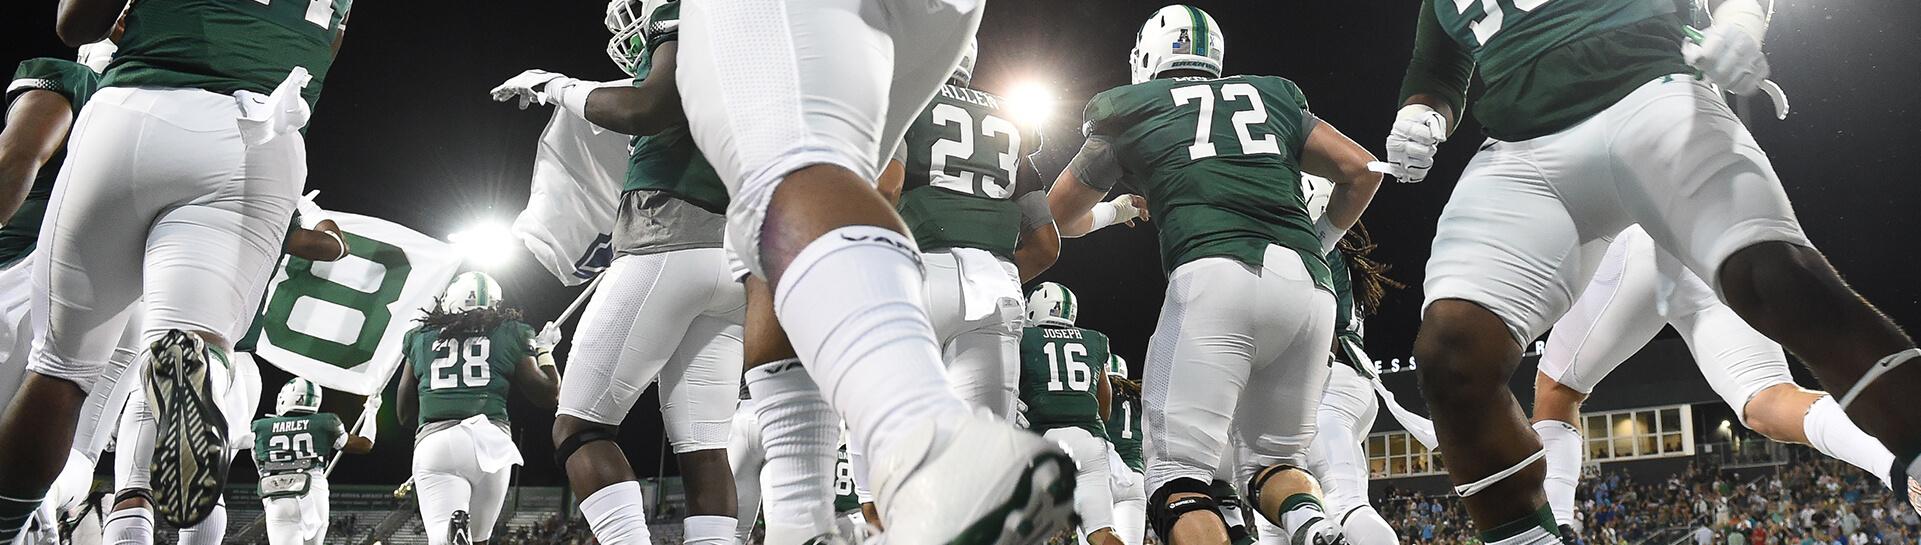 The Tulane football team during a game